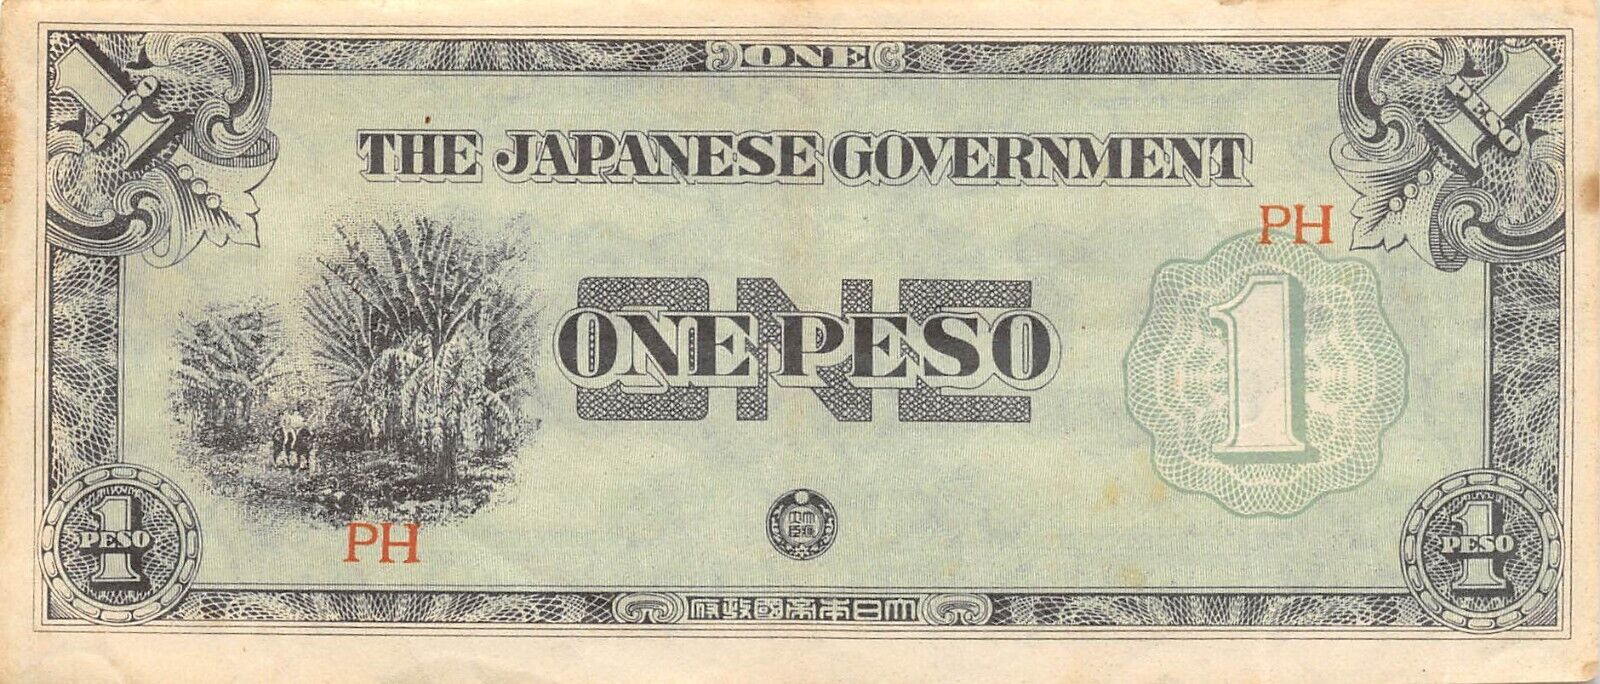 Philippines 1 Peso  Nd. 1942  Block Ph  Ww Ii Issue Circulated Banknote